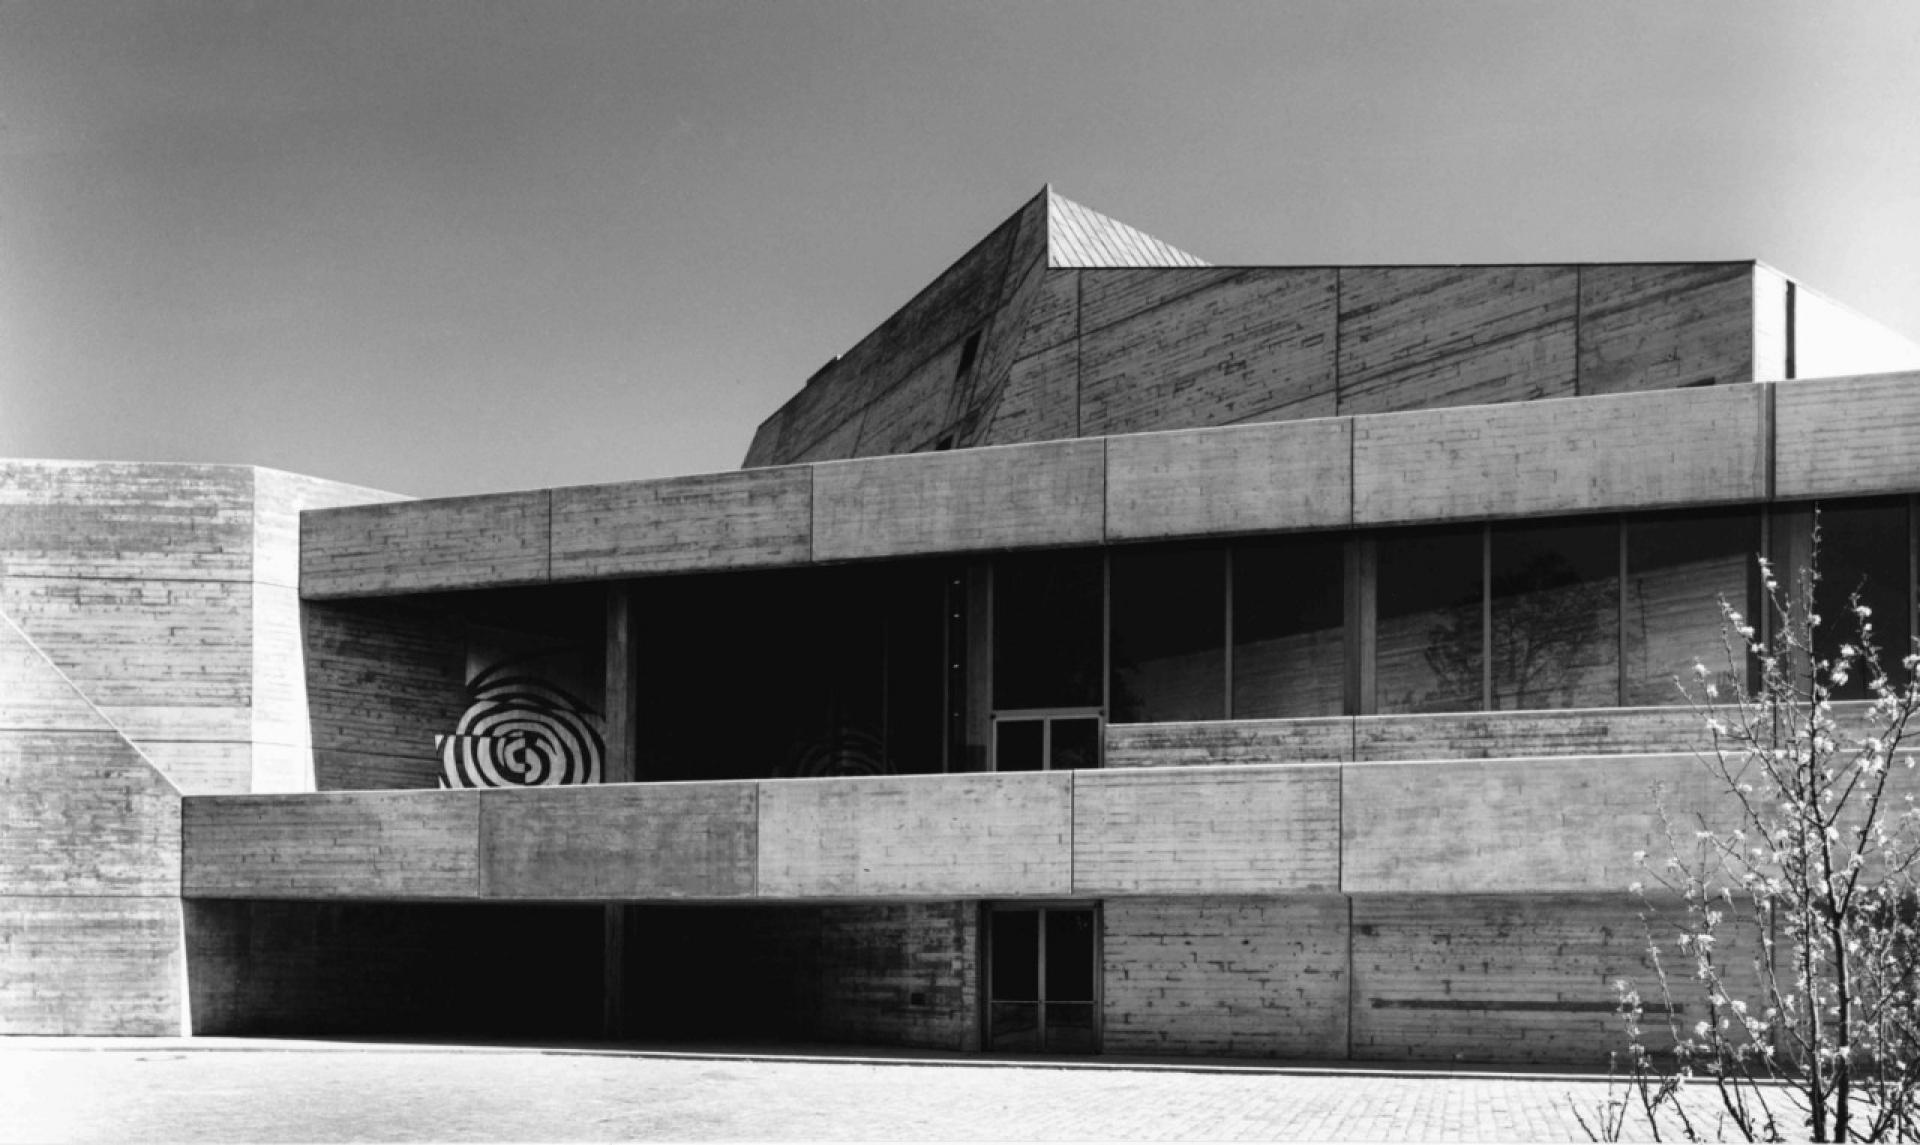 The theater captured shortly after its completion in 1966 by Sigrid Neubert. | Photo via Baunetz